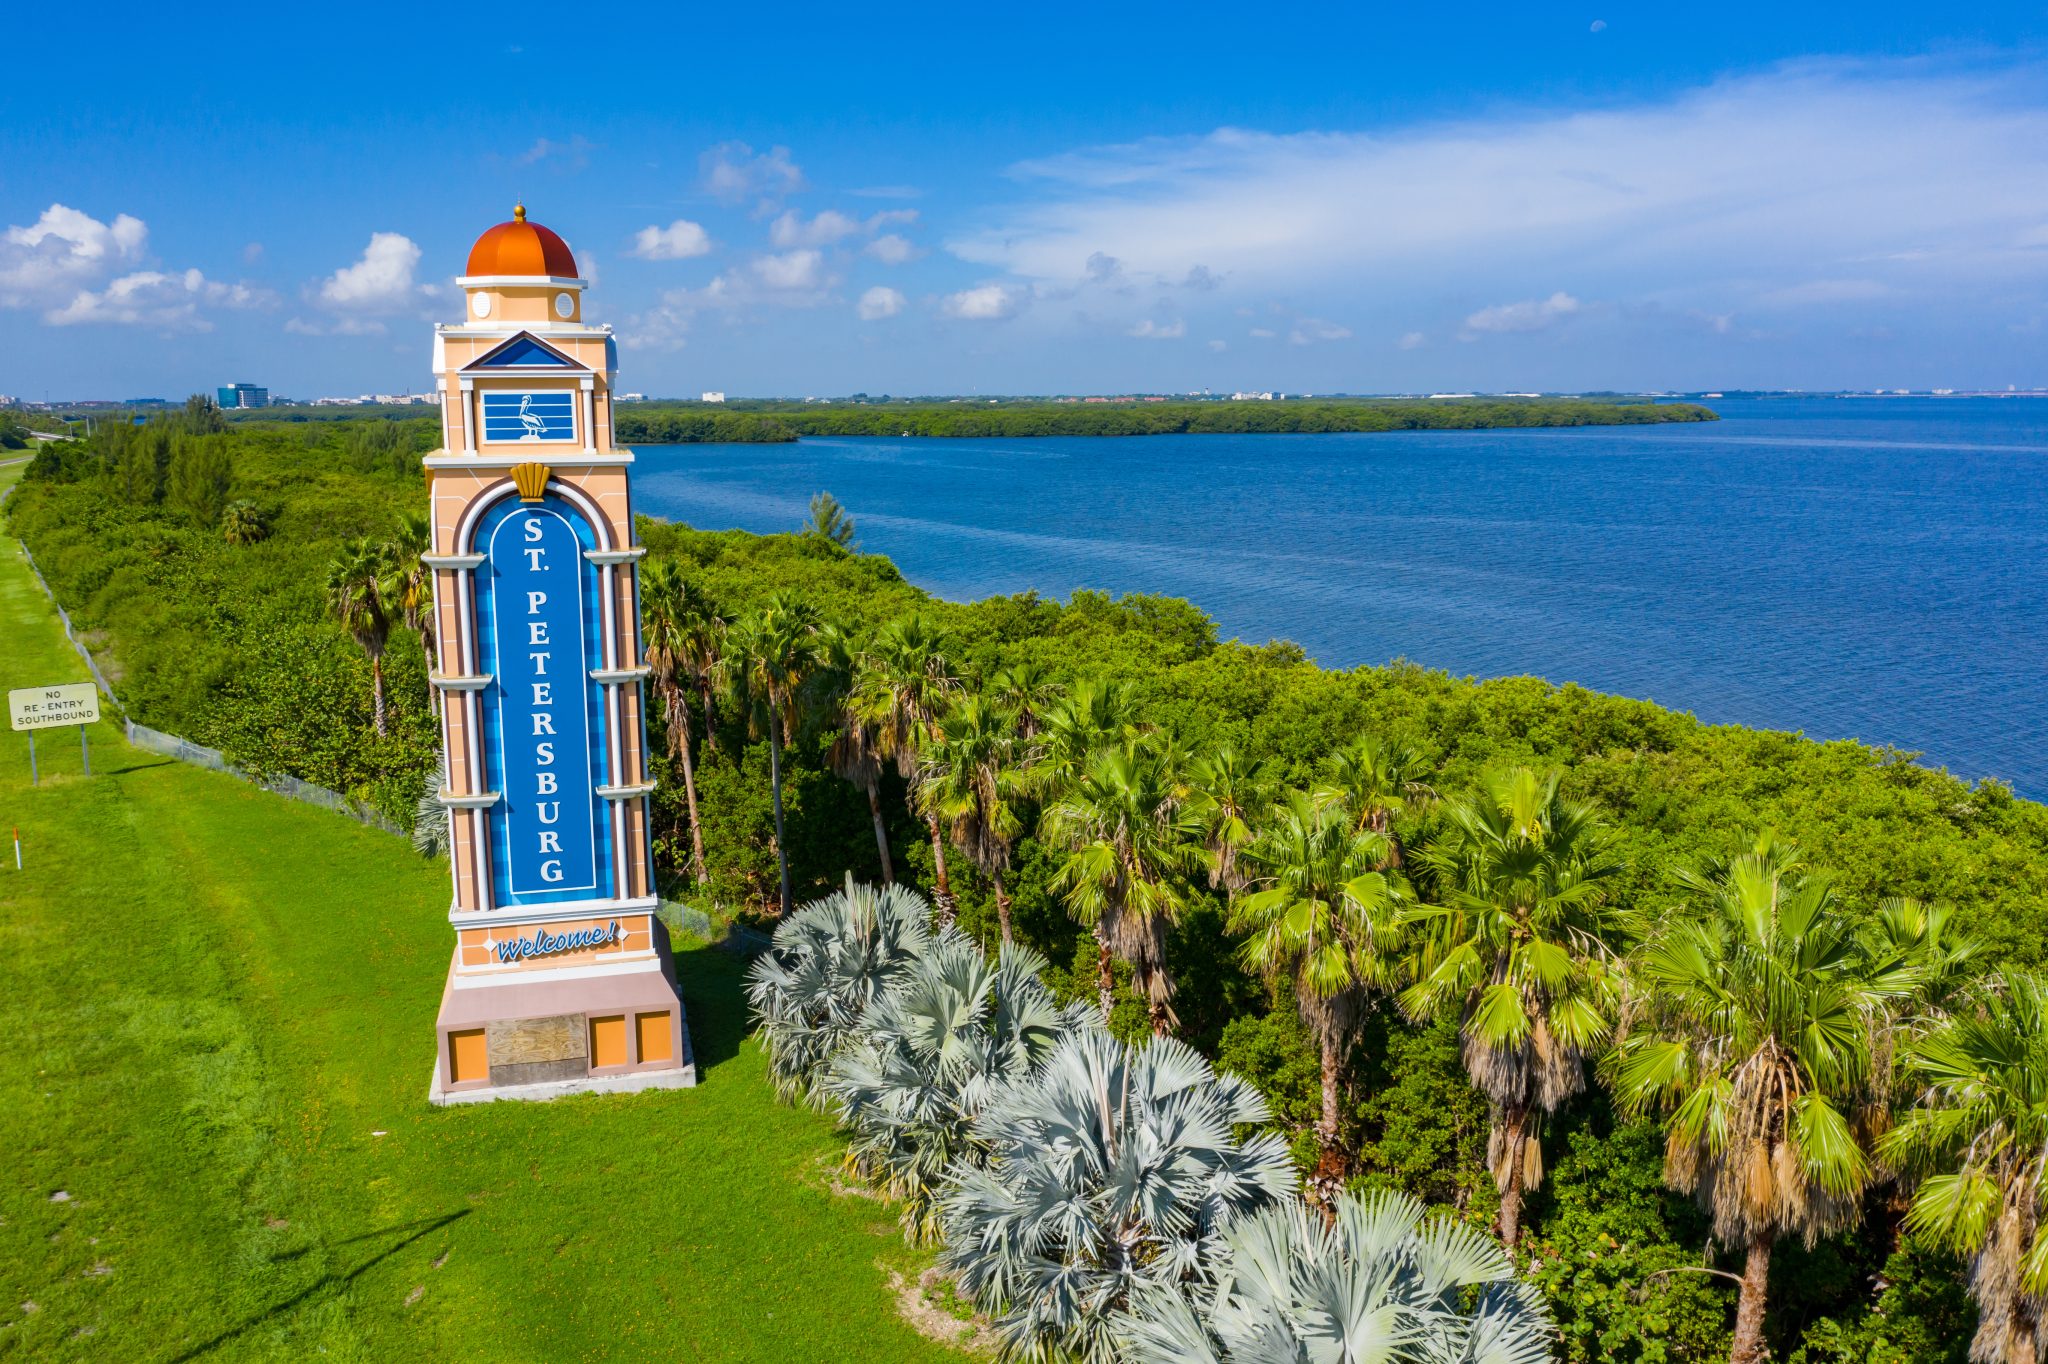 15 Things to Do in St. Petersburg FLSt Pete Downtown Guide